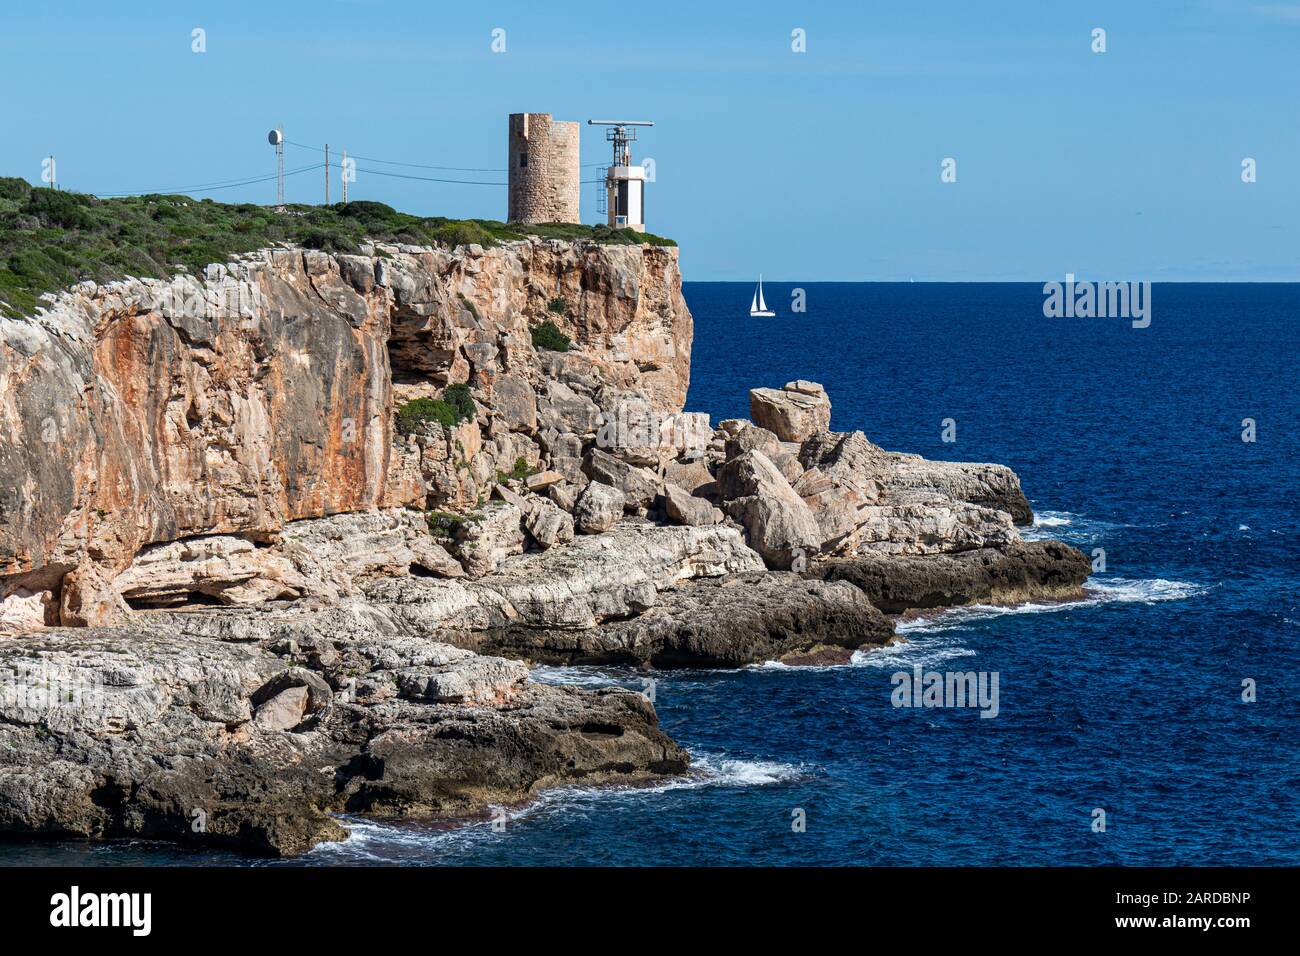 Old watchtower Torre d'en Beu, also Torre de Cala Figuera, alongside with small lighthouse on cliff at Cala Figuera, Mallorca, Balearic Islands, Spain Stock Photo